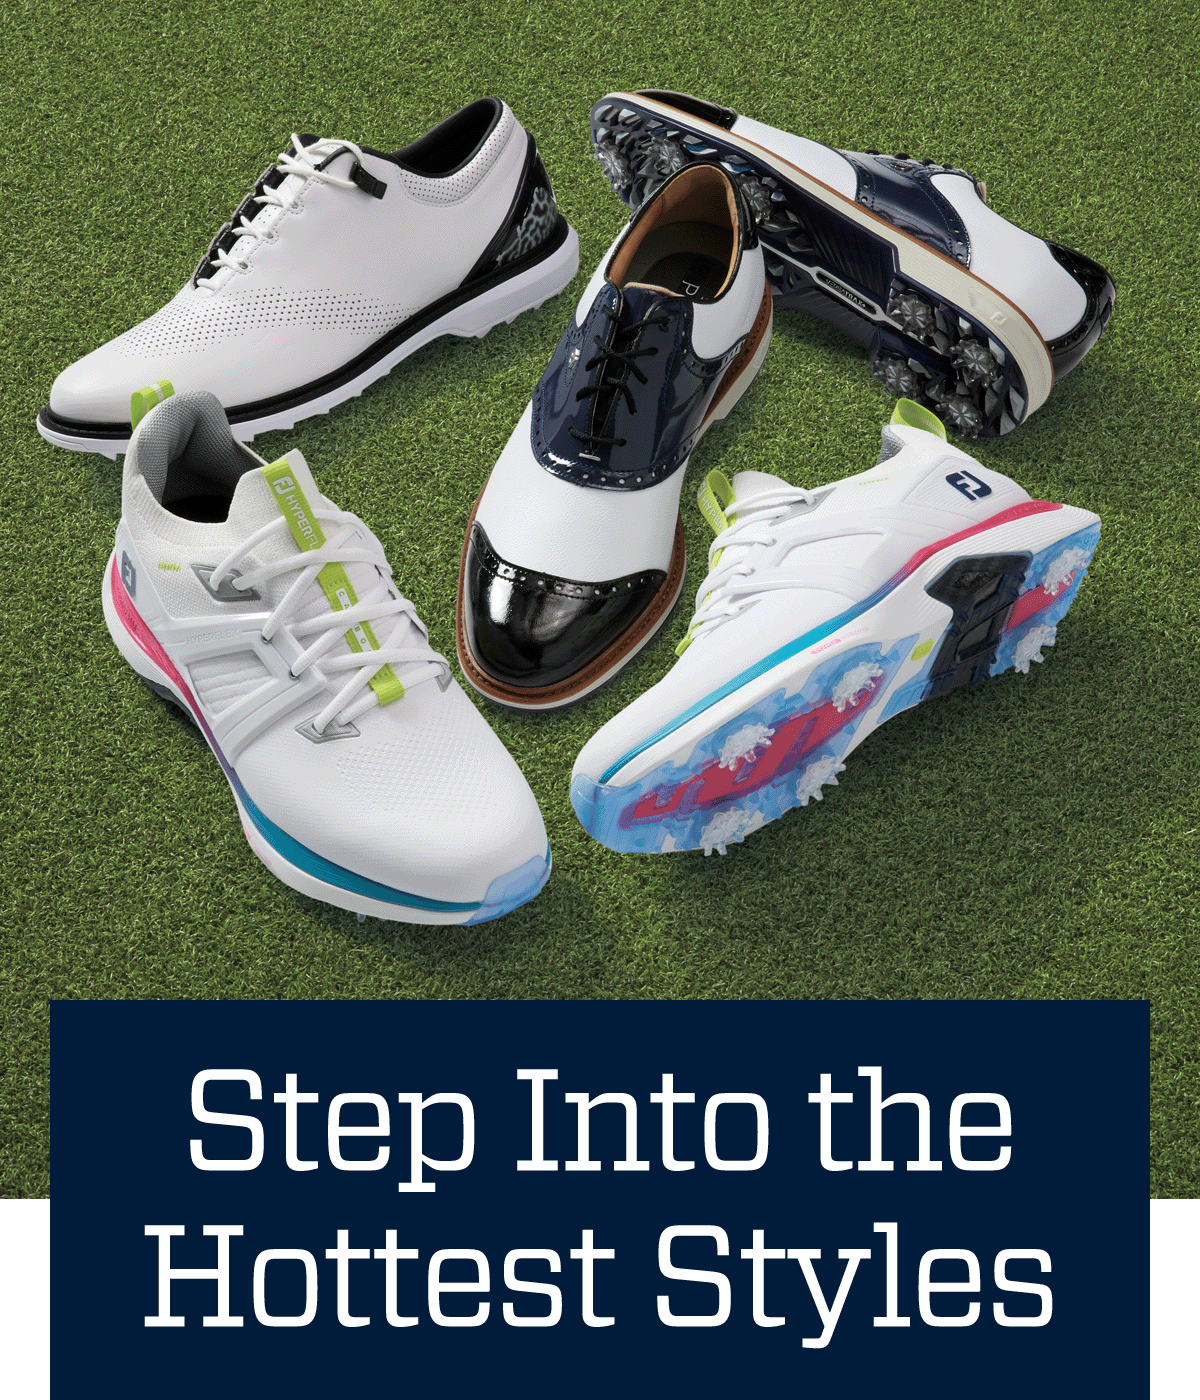  Step into the hottest styles.